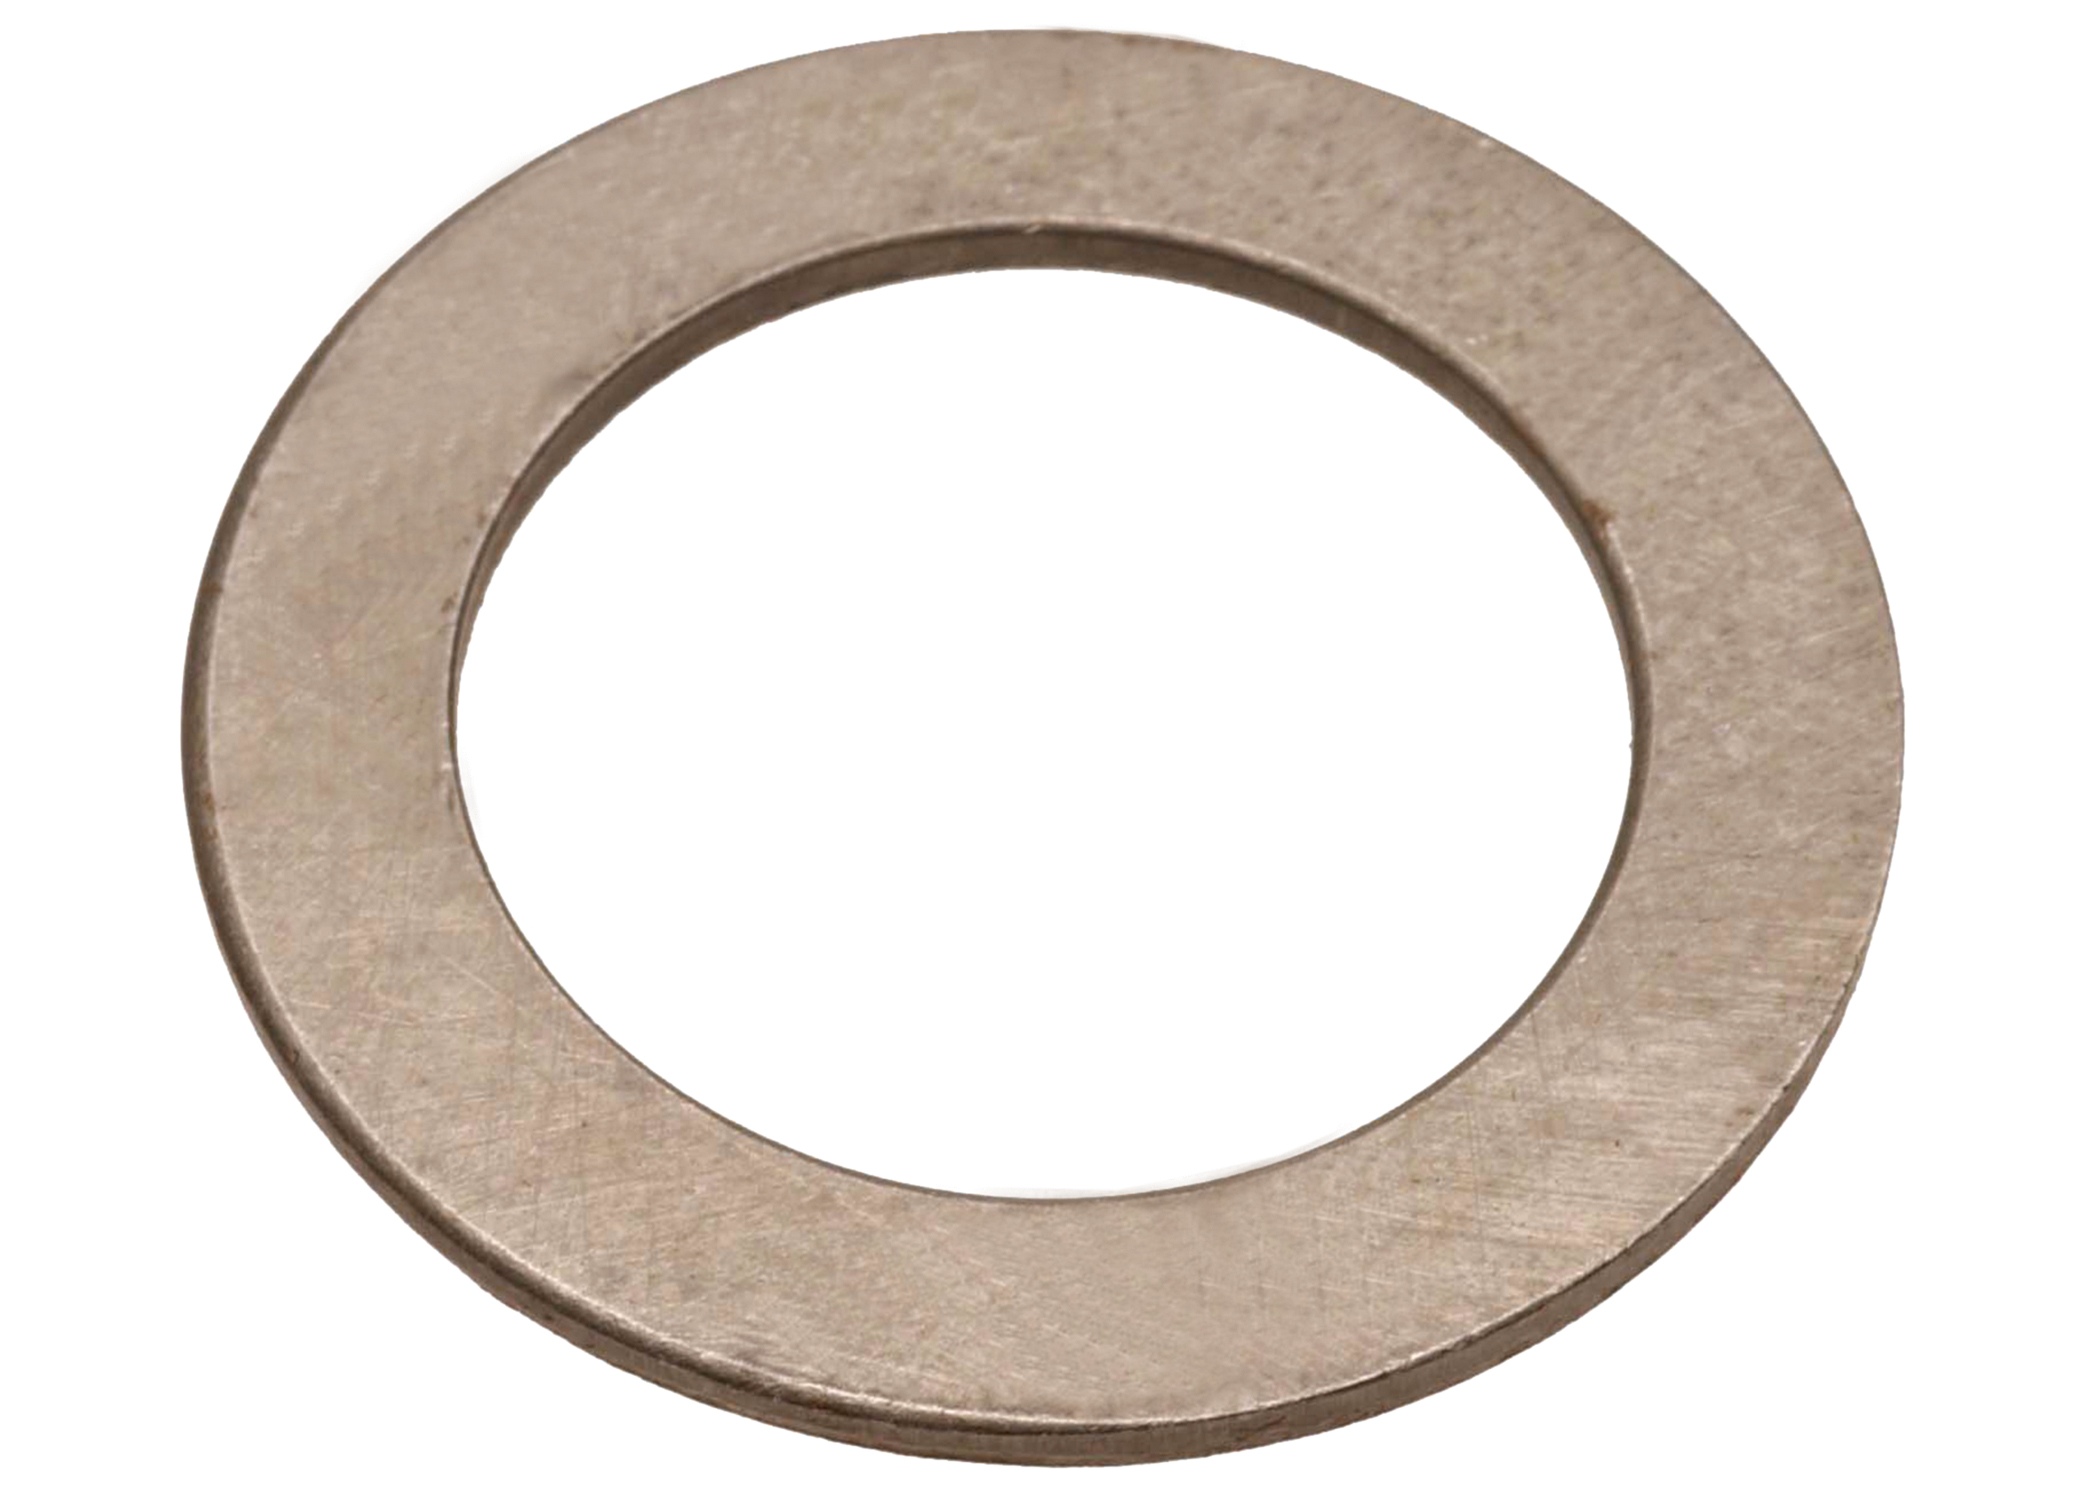 GM GENUINE PARTS - Automatic Transmission Clutch Housing Thrust Washer (Reverse) - GMP 8642068